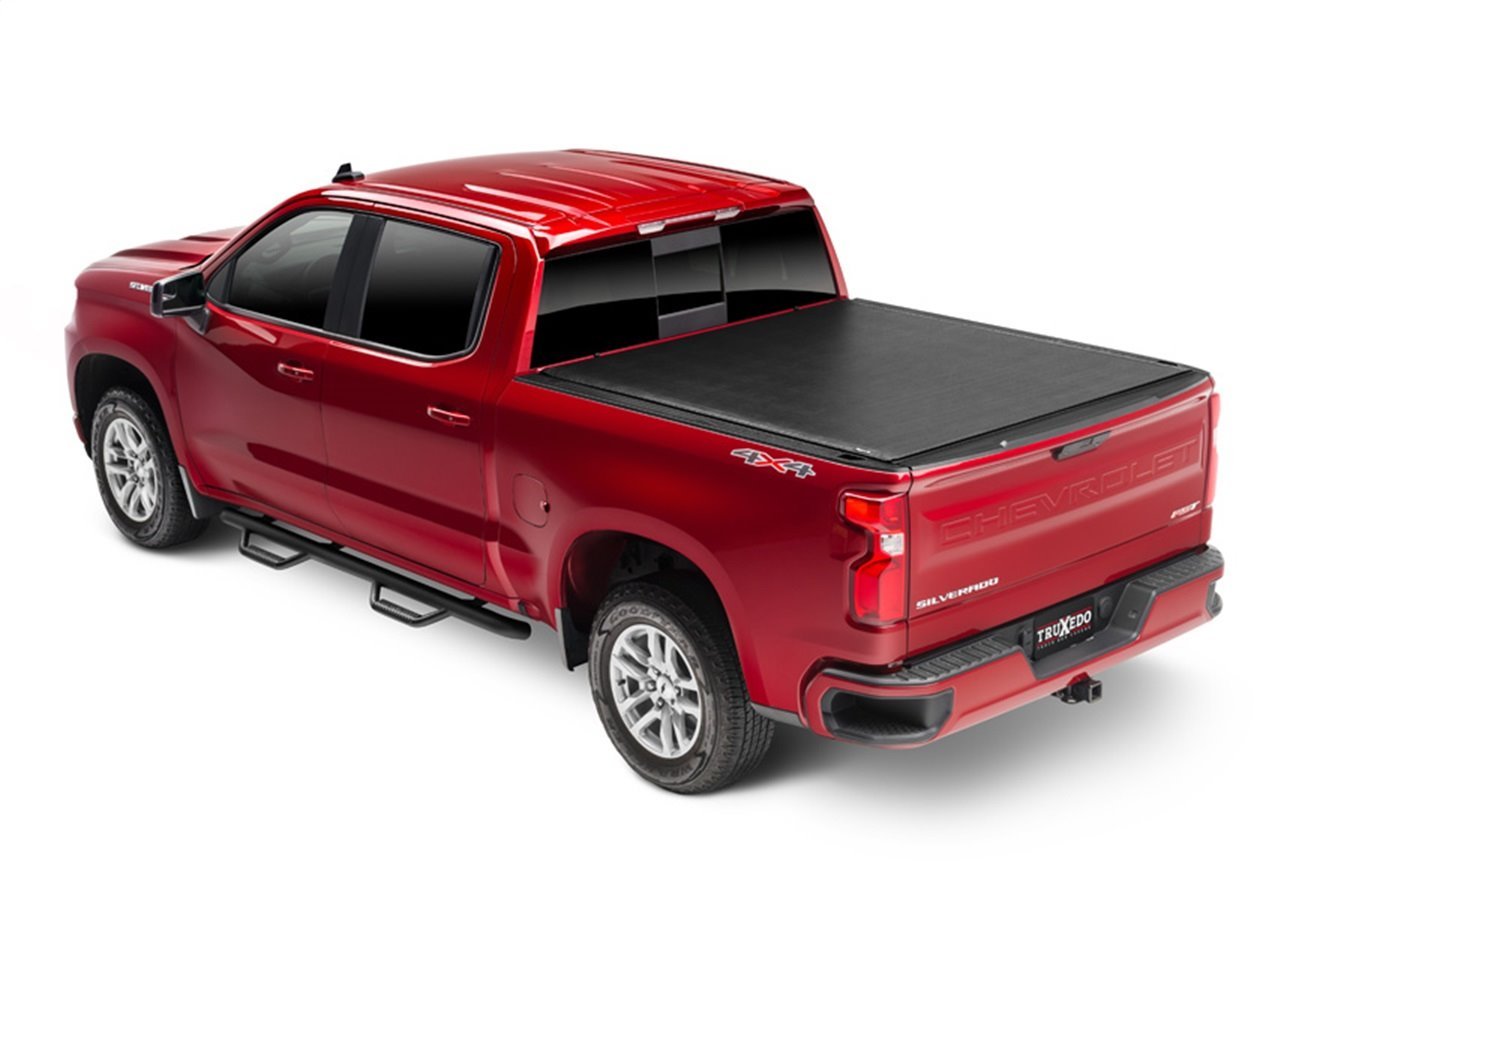 Sentry Roll-Up Tonneau Cover Fits Select GM Sierra/Silverado 1500, Bed Length: 5 ft. 9 in.